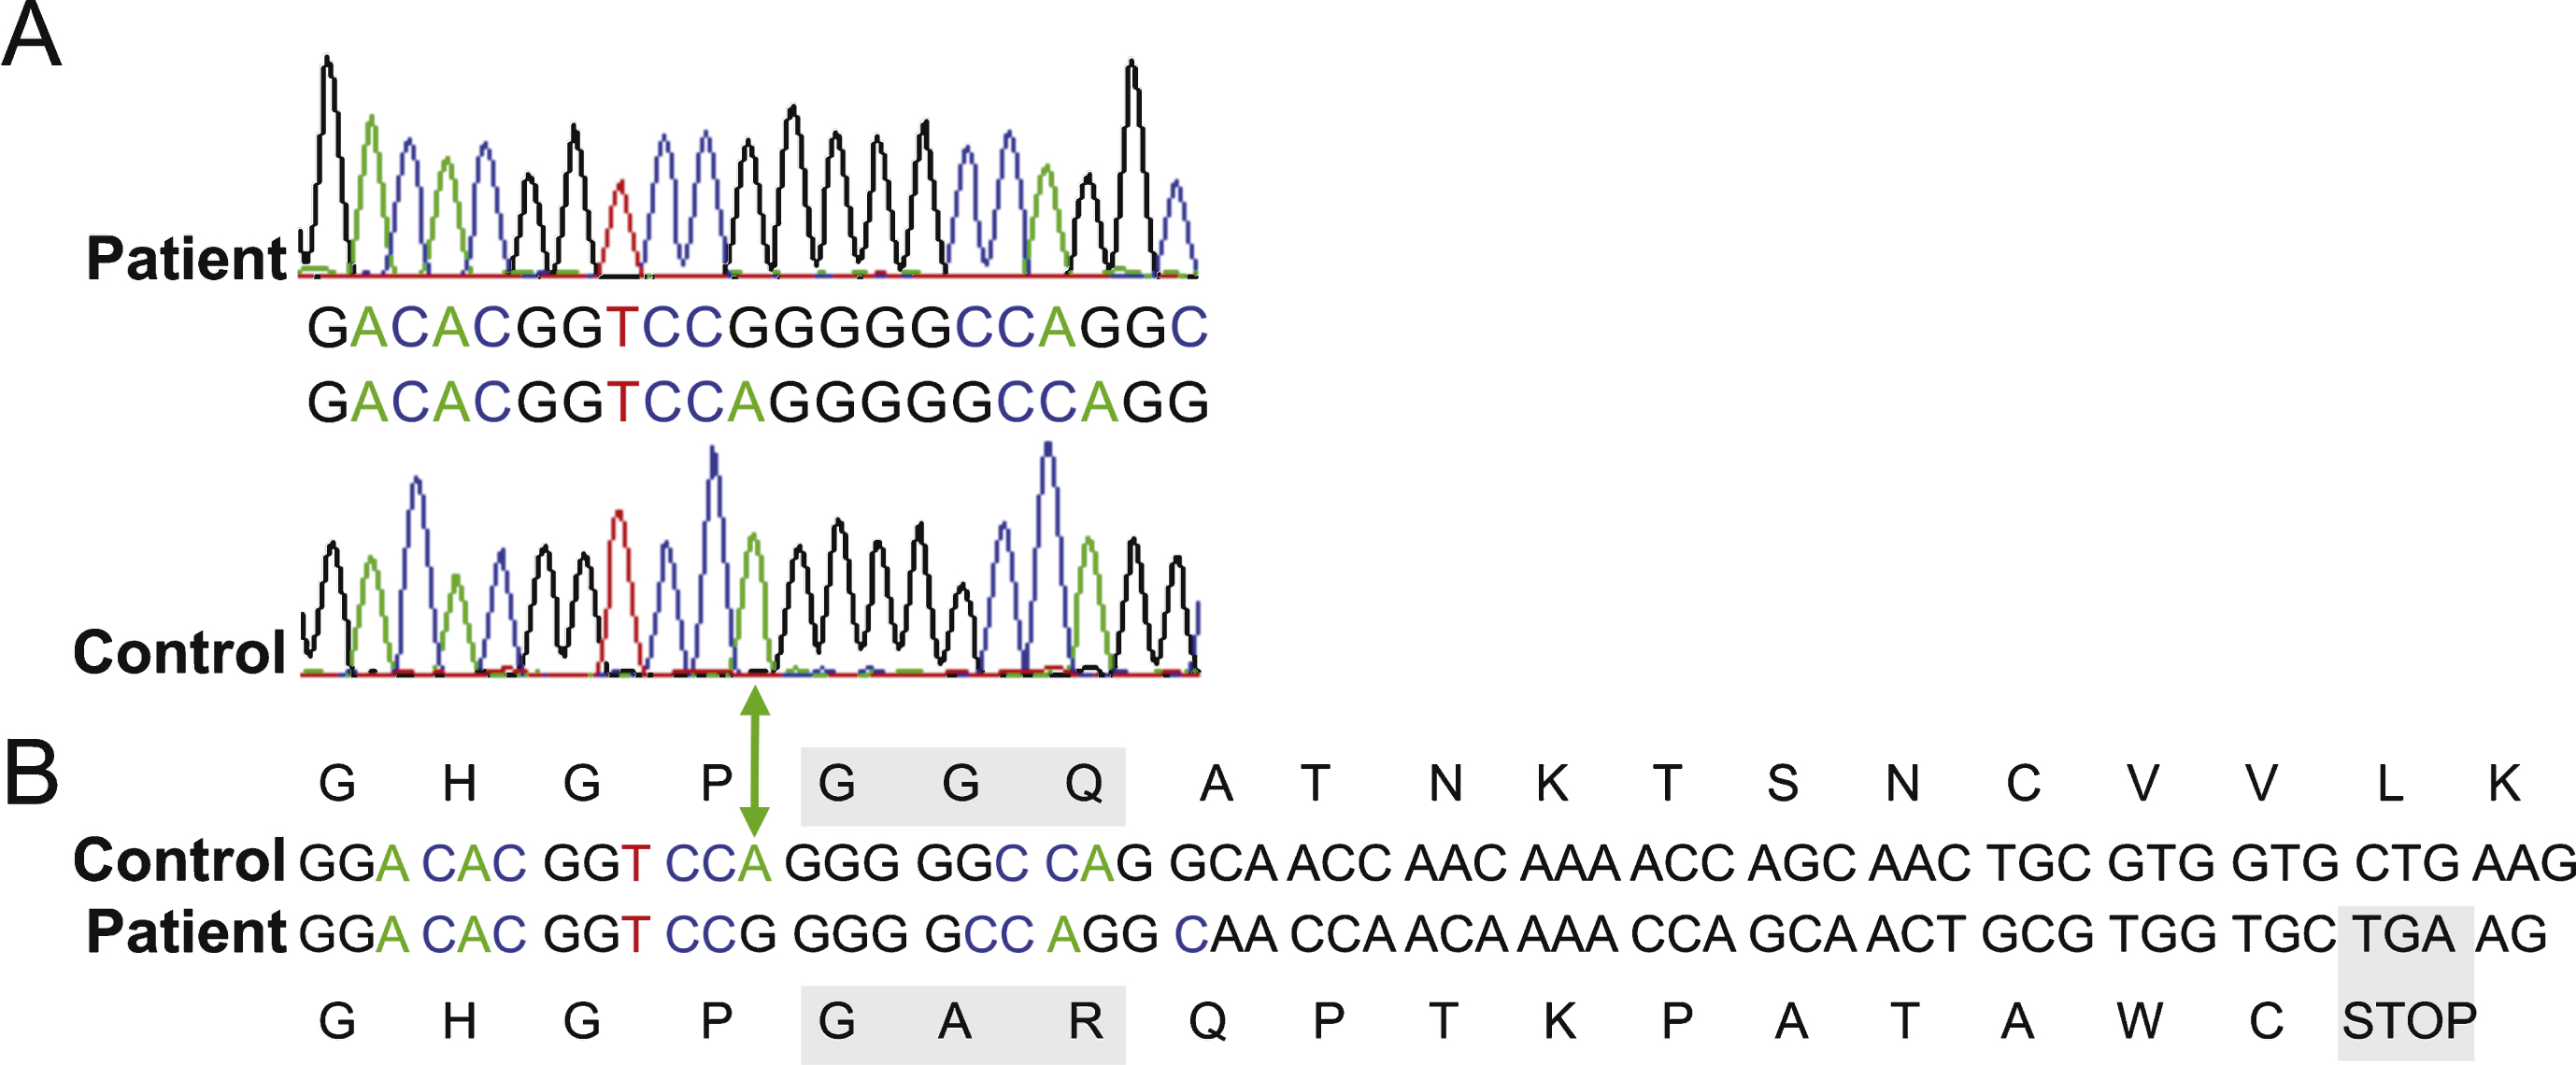 Sanger sequence analysis of C12orf65 patient gene. A. Region of an  electropherogram of Sanger sequencing of the C12orf65 gene from the patient (upper panel)  and wildtype control (lower panel), aligned to the GenBank accession: NM_152269.4 [19]. The green arrow indicates the position of the adenine nucleotide in control sample that is deleted from the patient’s genome. B. Schematic demonstrating the consequence of the single nucleotide deletion on the peptide sequence. The resultant frameshift introduces amino acid  changes and a premature UGA stop codon (grey box) predicted to encode a truncated protein. The alterations to the functional conserved GGQ motif are also boxed in grey.